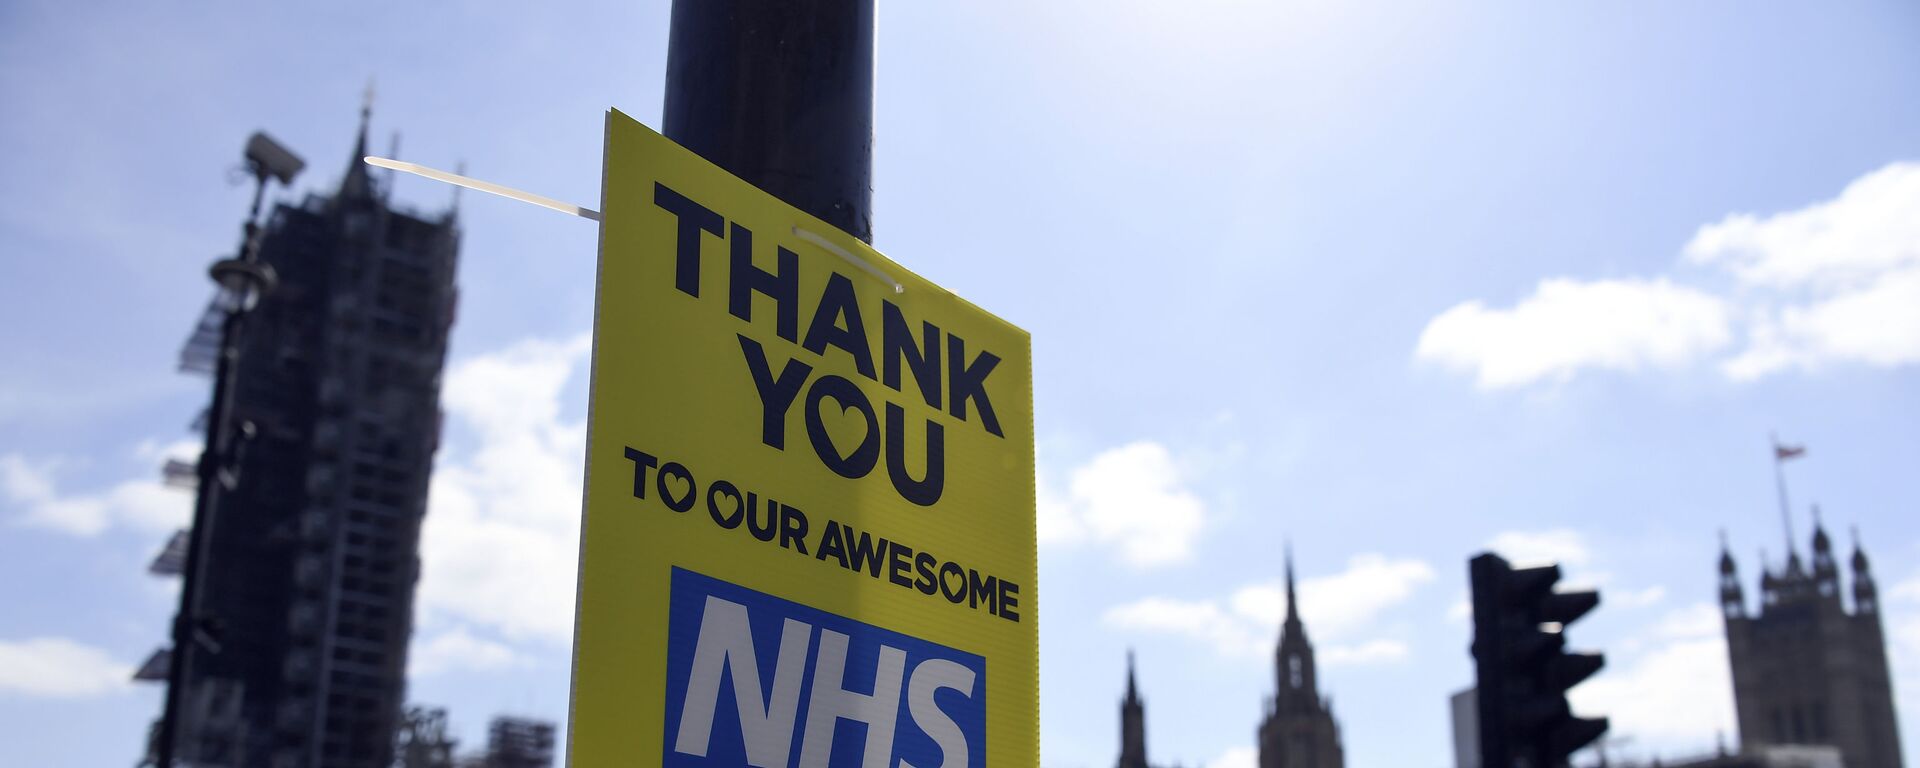 A message in support to the NHS is seen in Westminster, during to the Coronavirus outbreak, in London, Tuesday, April 14, 2020 - Sputnik International, 1920, 06.02.2021